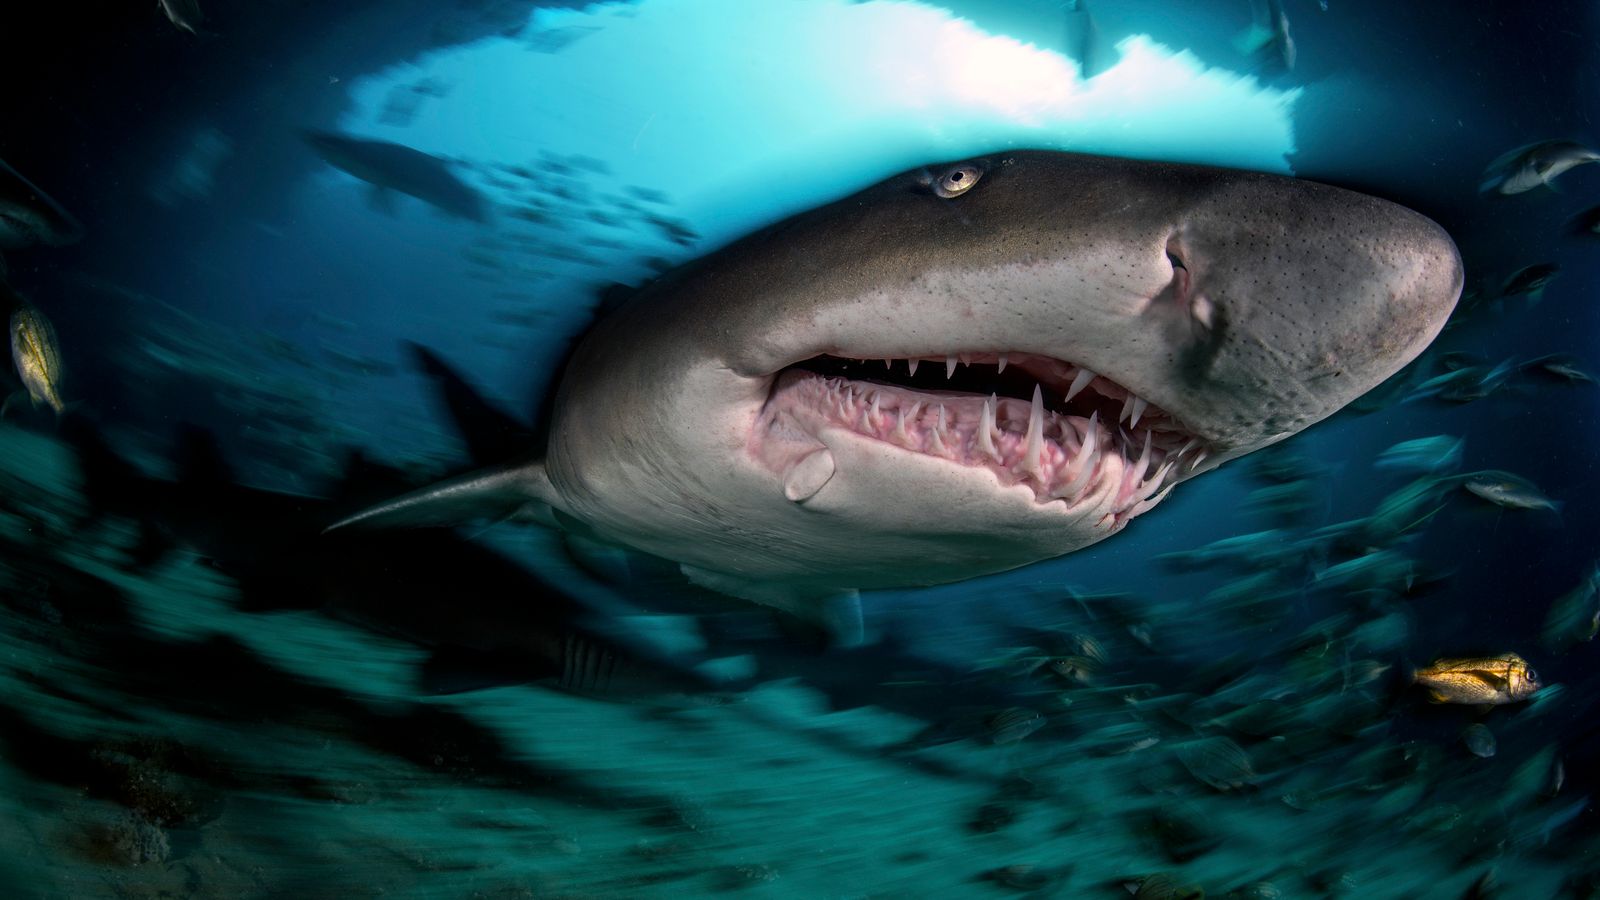 Woman in critical condition after shark attack at New York City beach